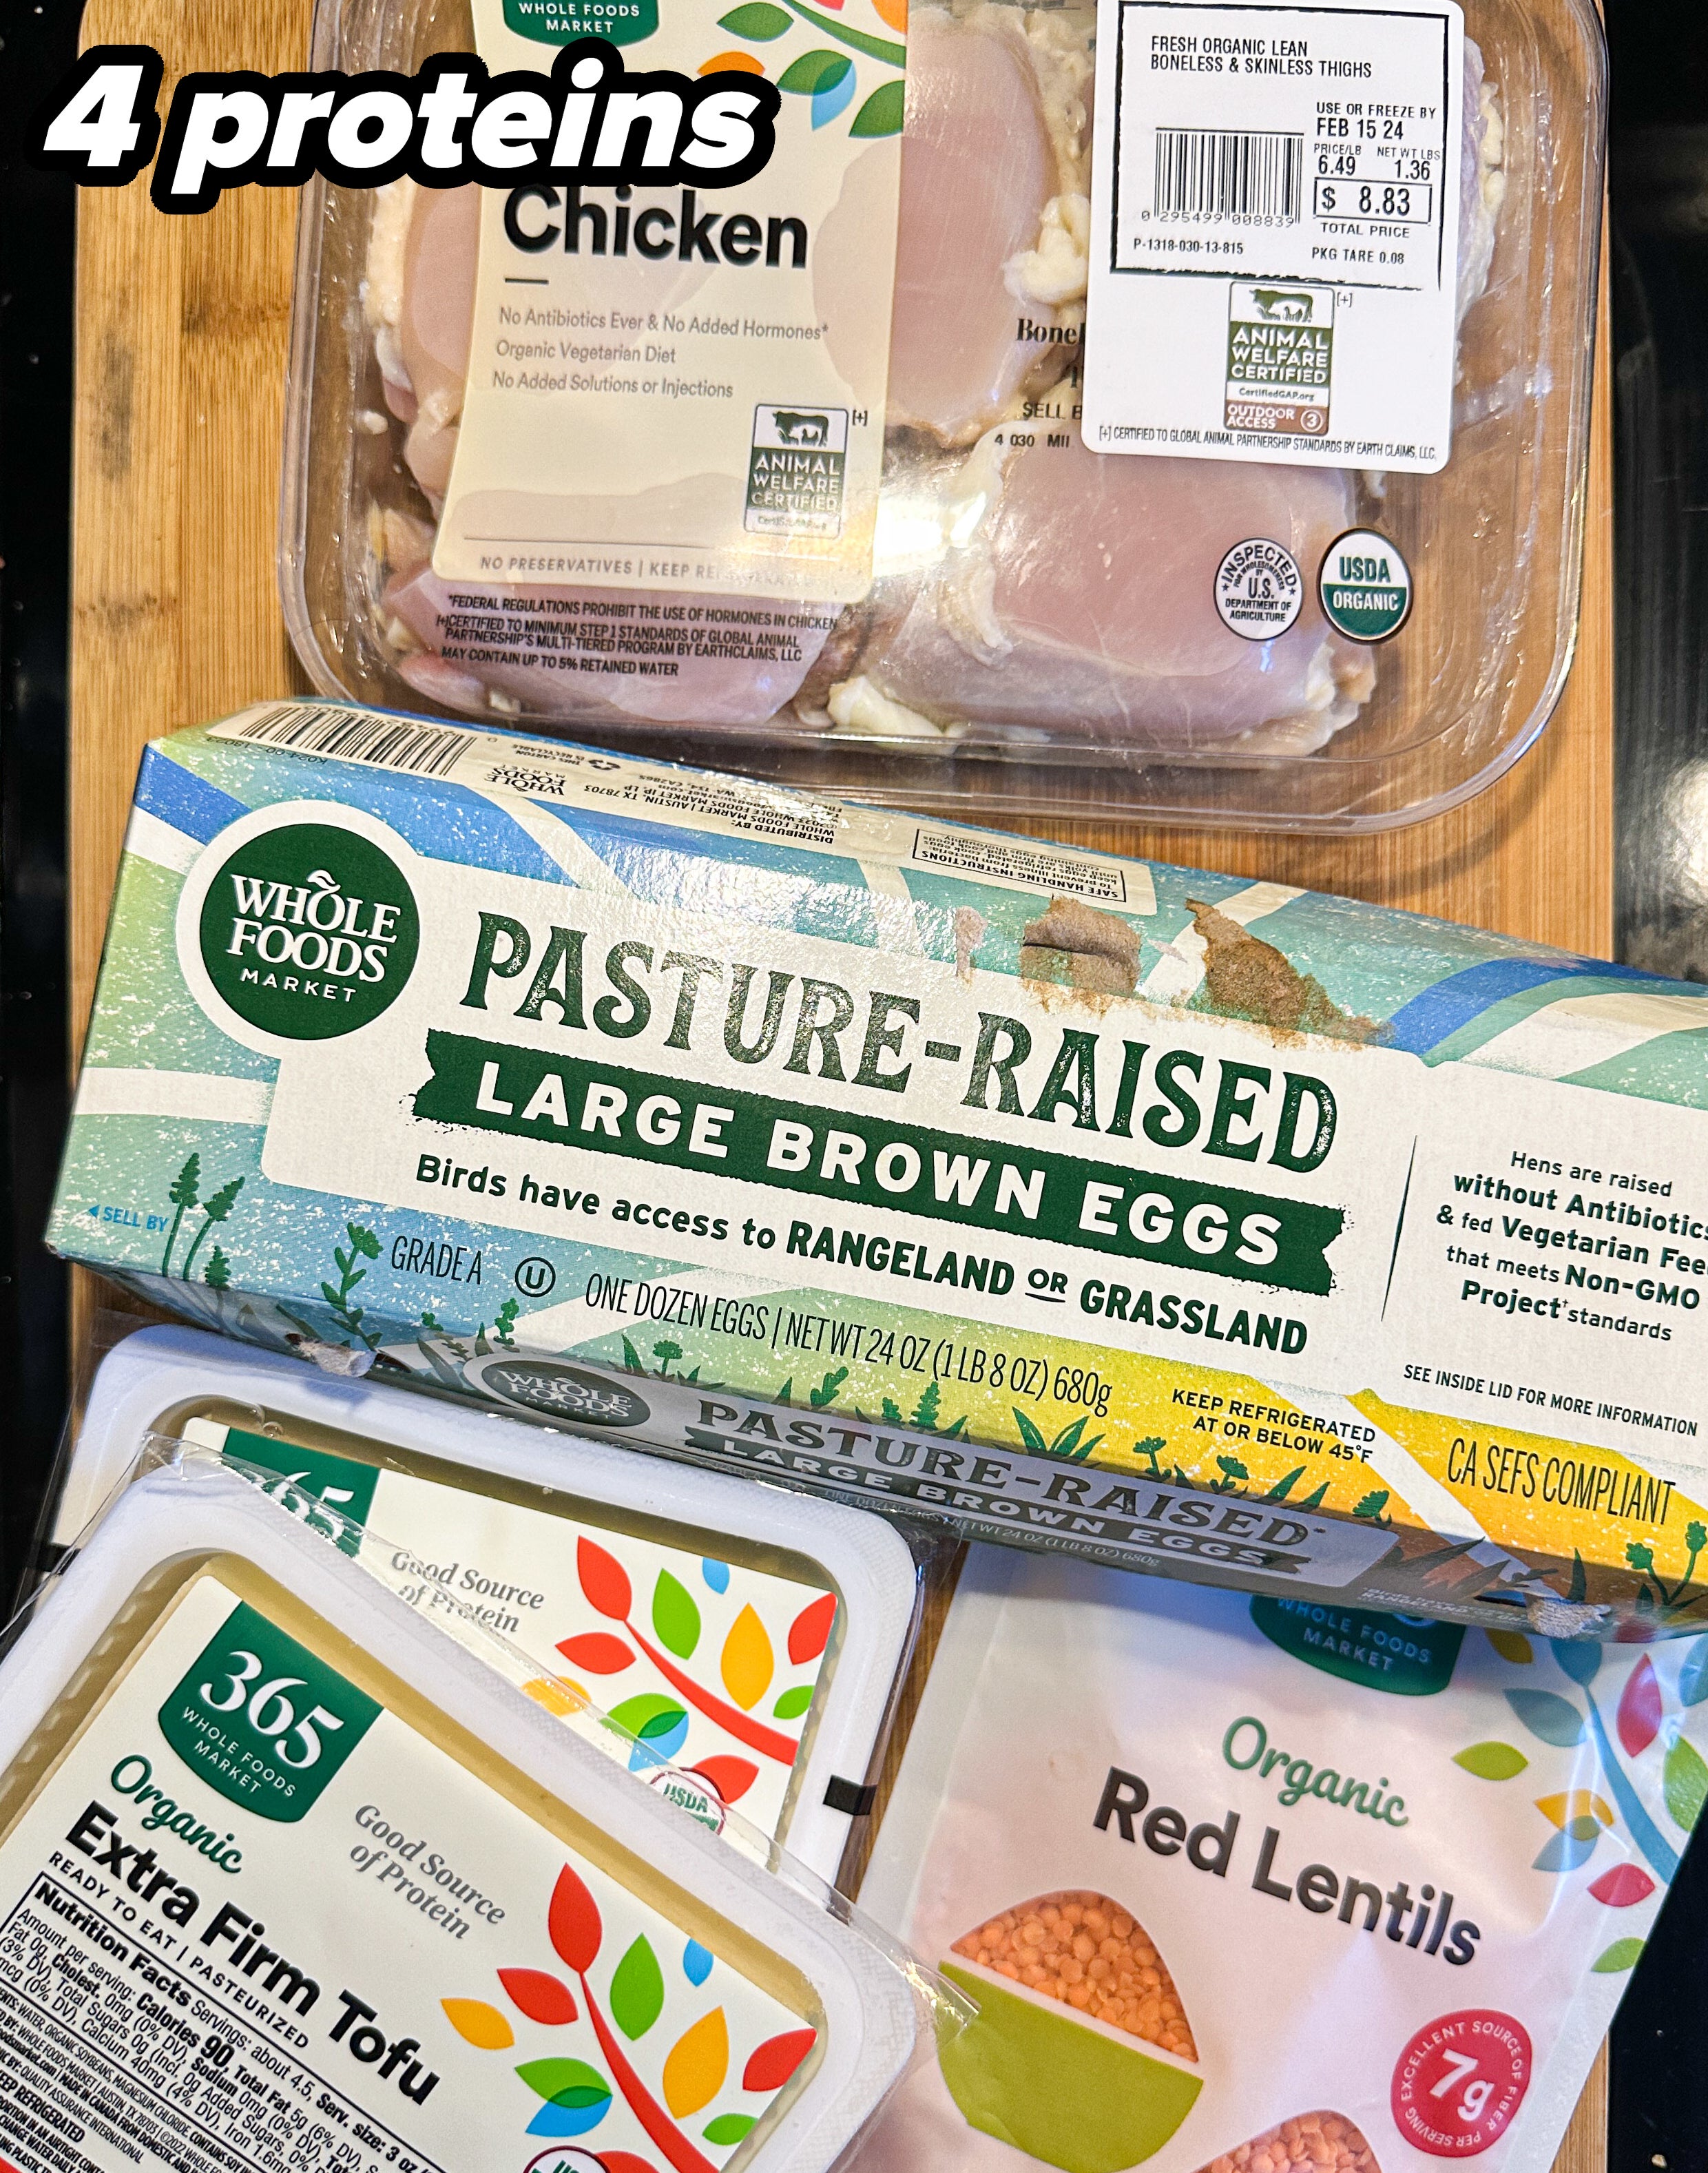 Various grocery items including organic chicken, pasture-raised eggs, extra firm tofu, and red lentils